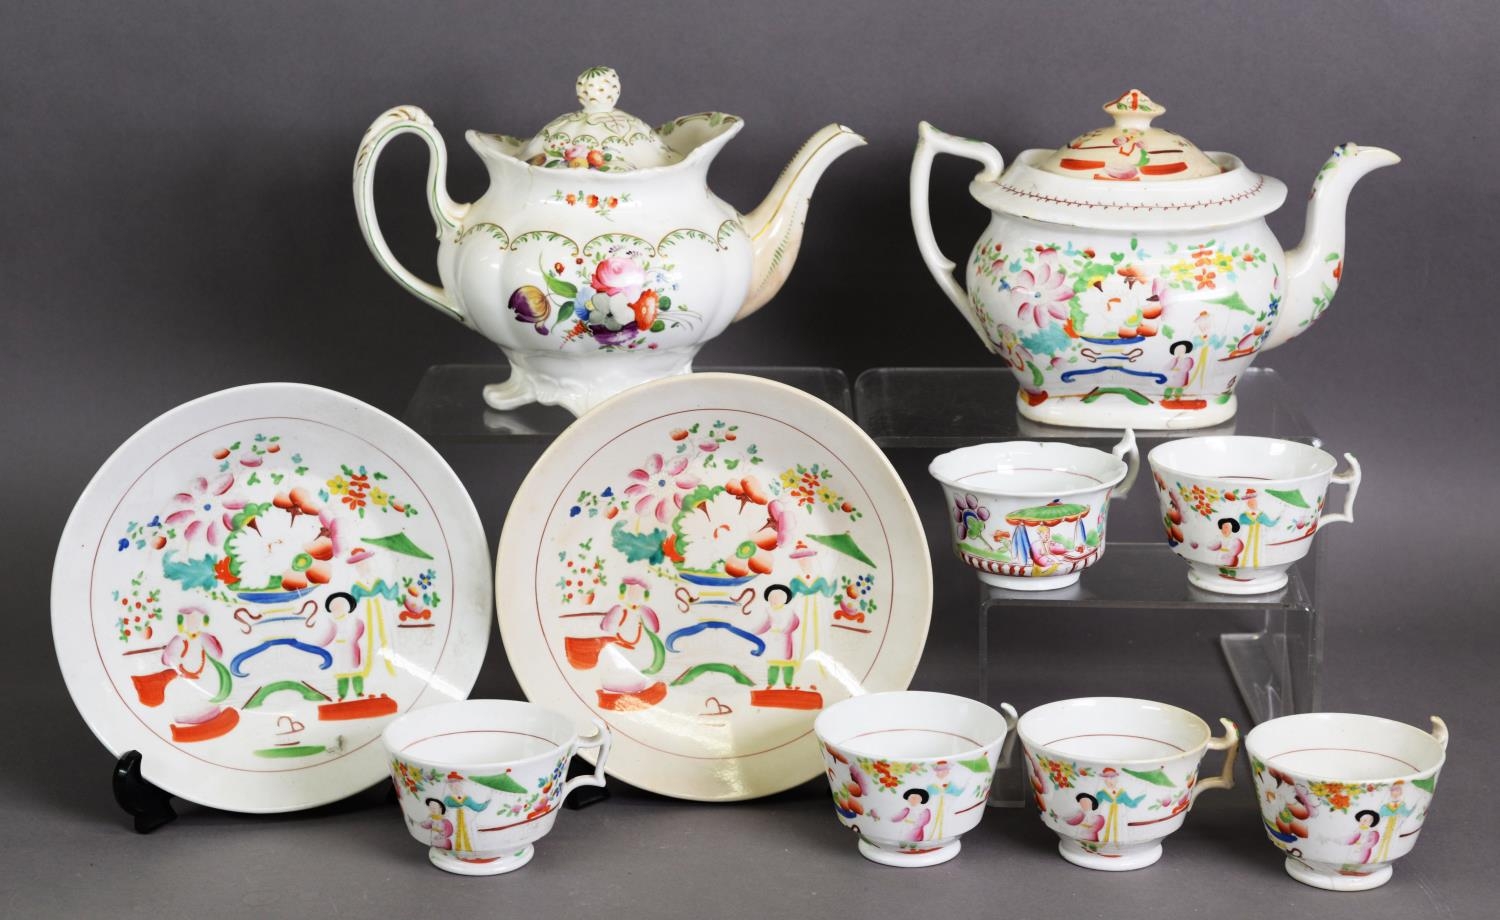 EIGHT PIECE NINETEENTH CENTURY HILDITCH & SONS PORCELAIN PART TEA SERVICE, printed and painted in